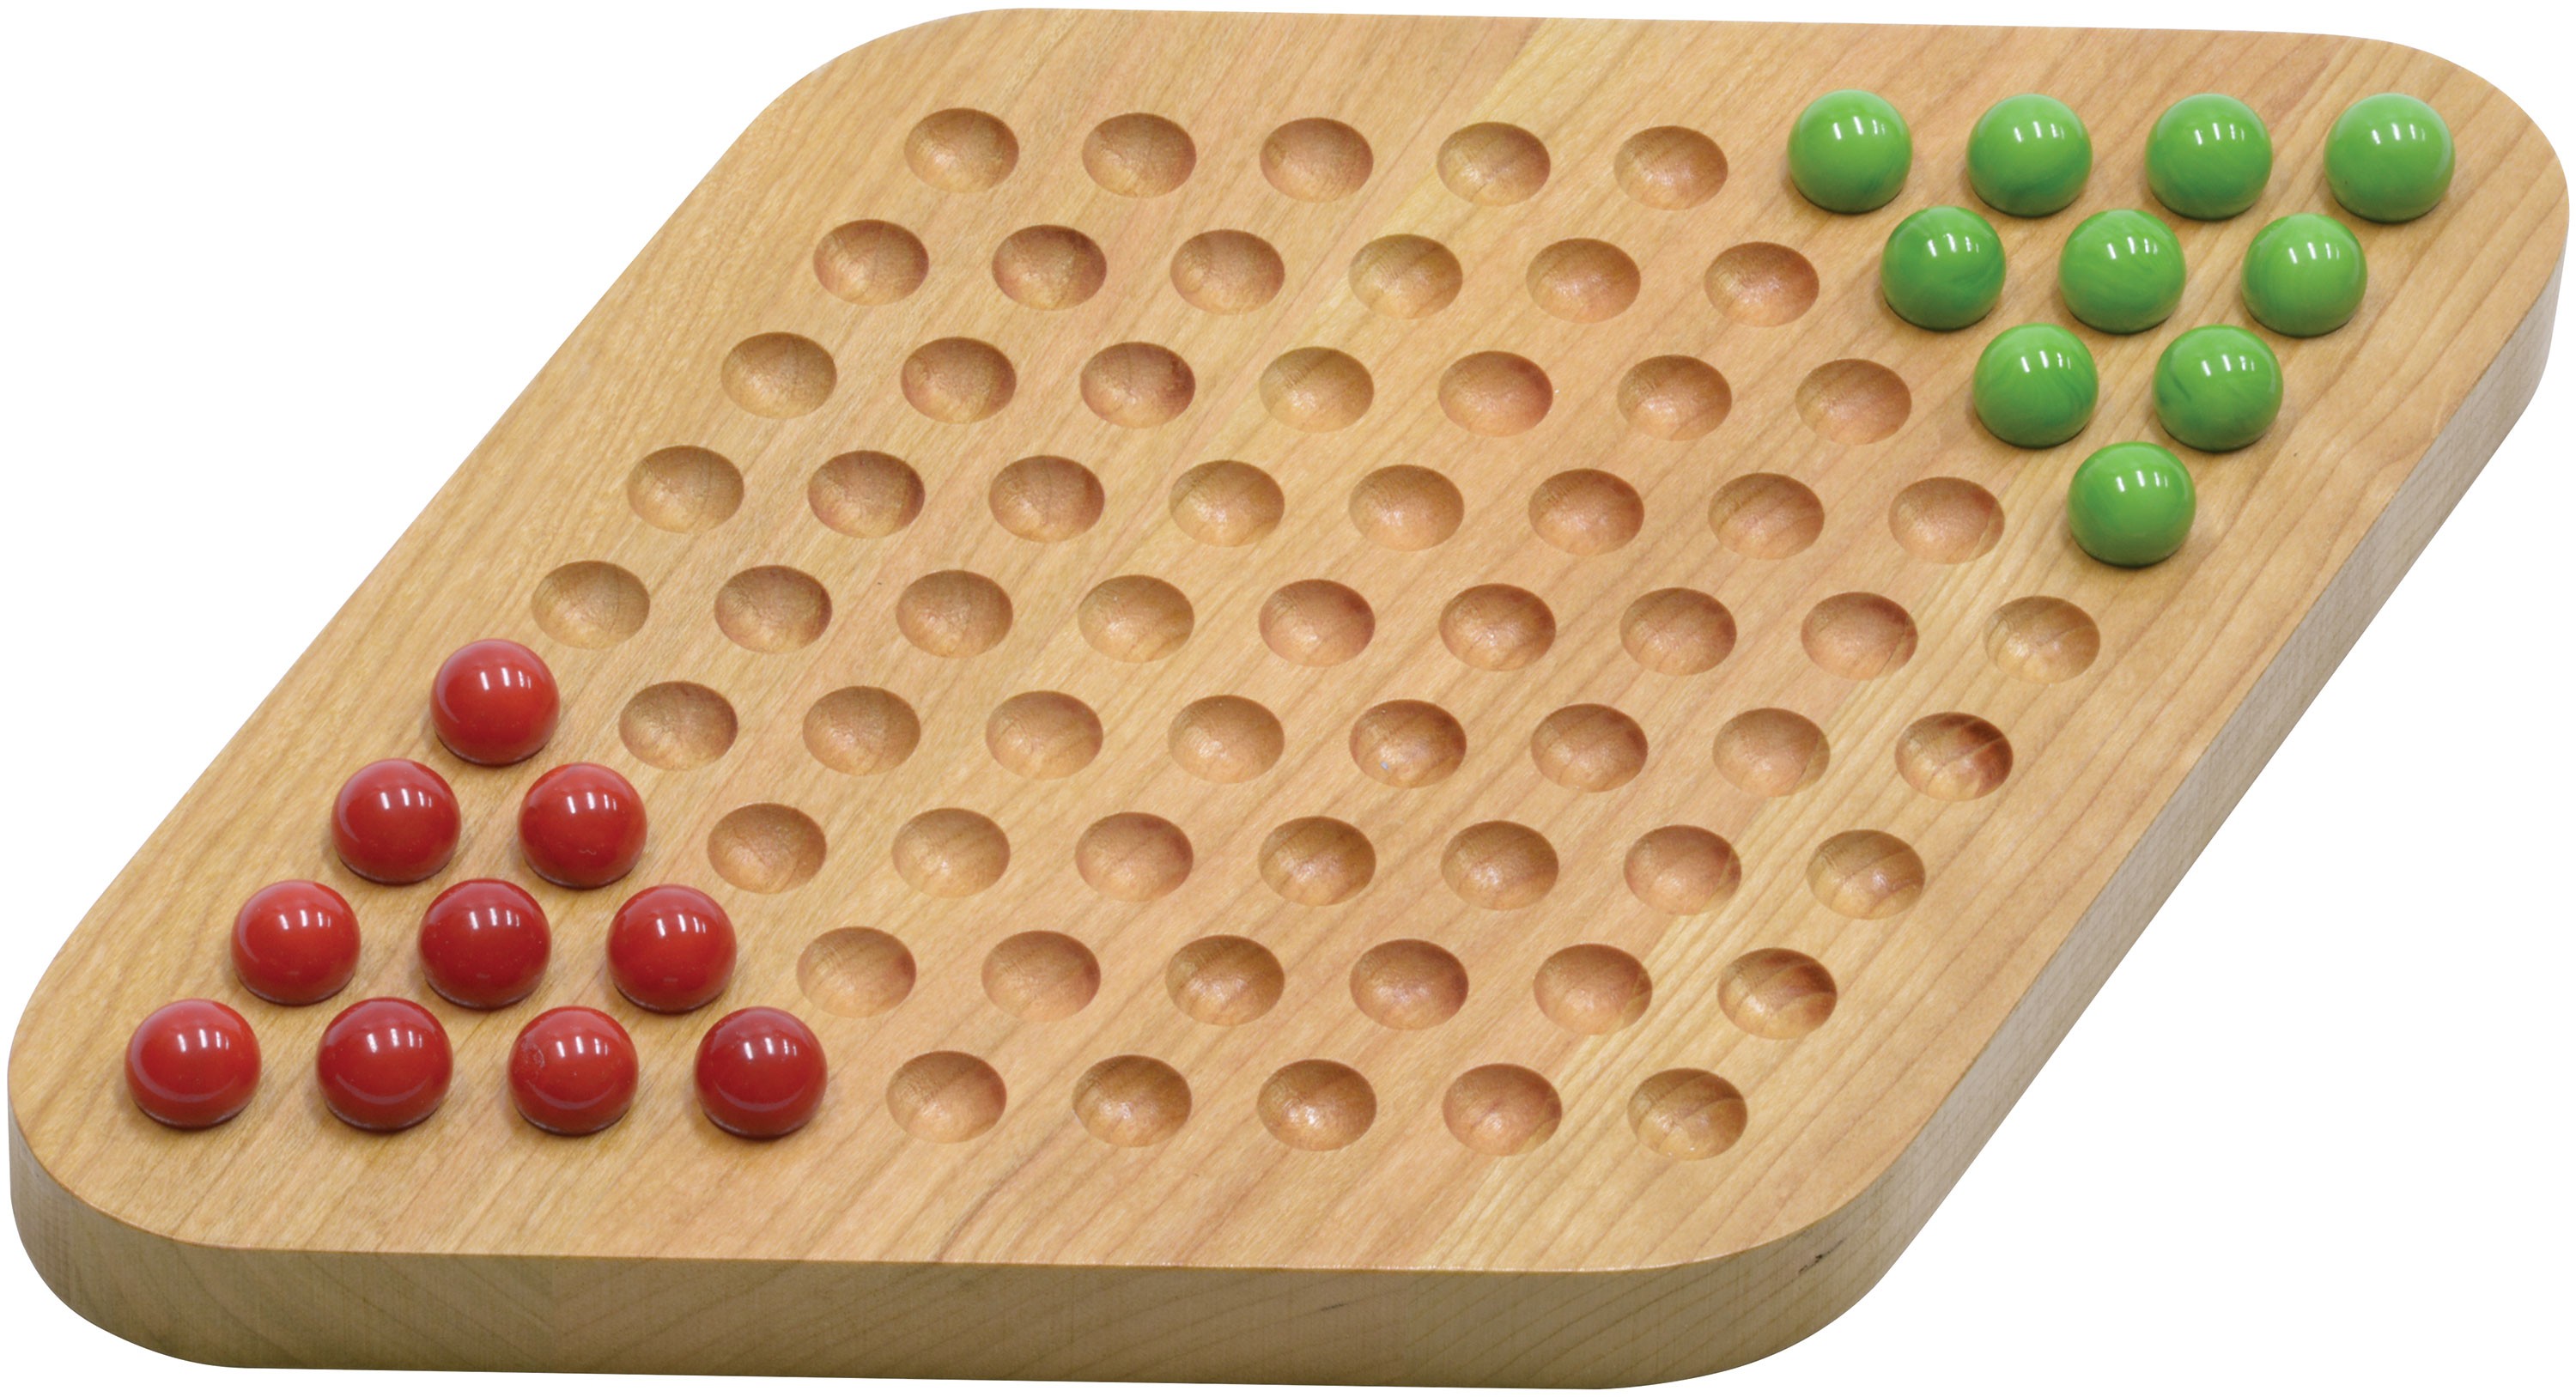 play chinese checkers 3 player online